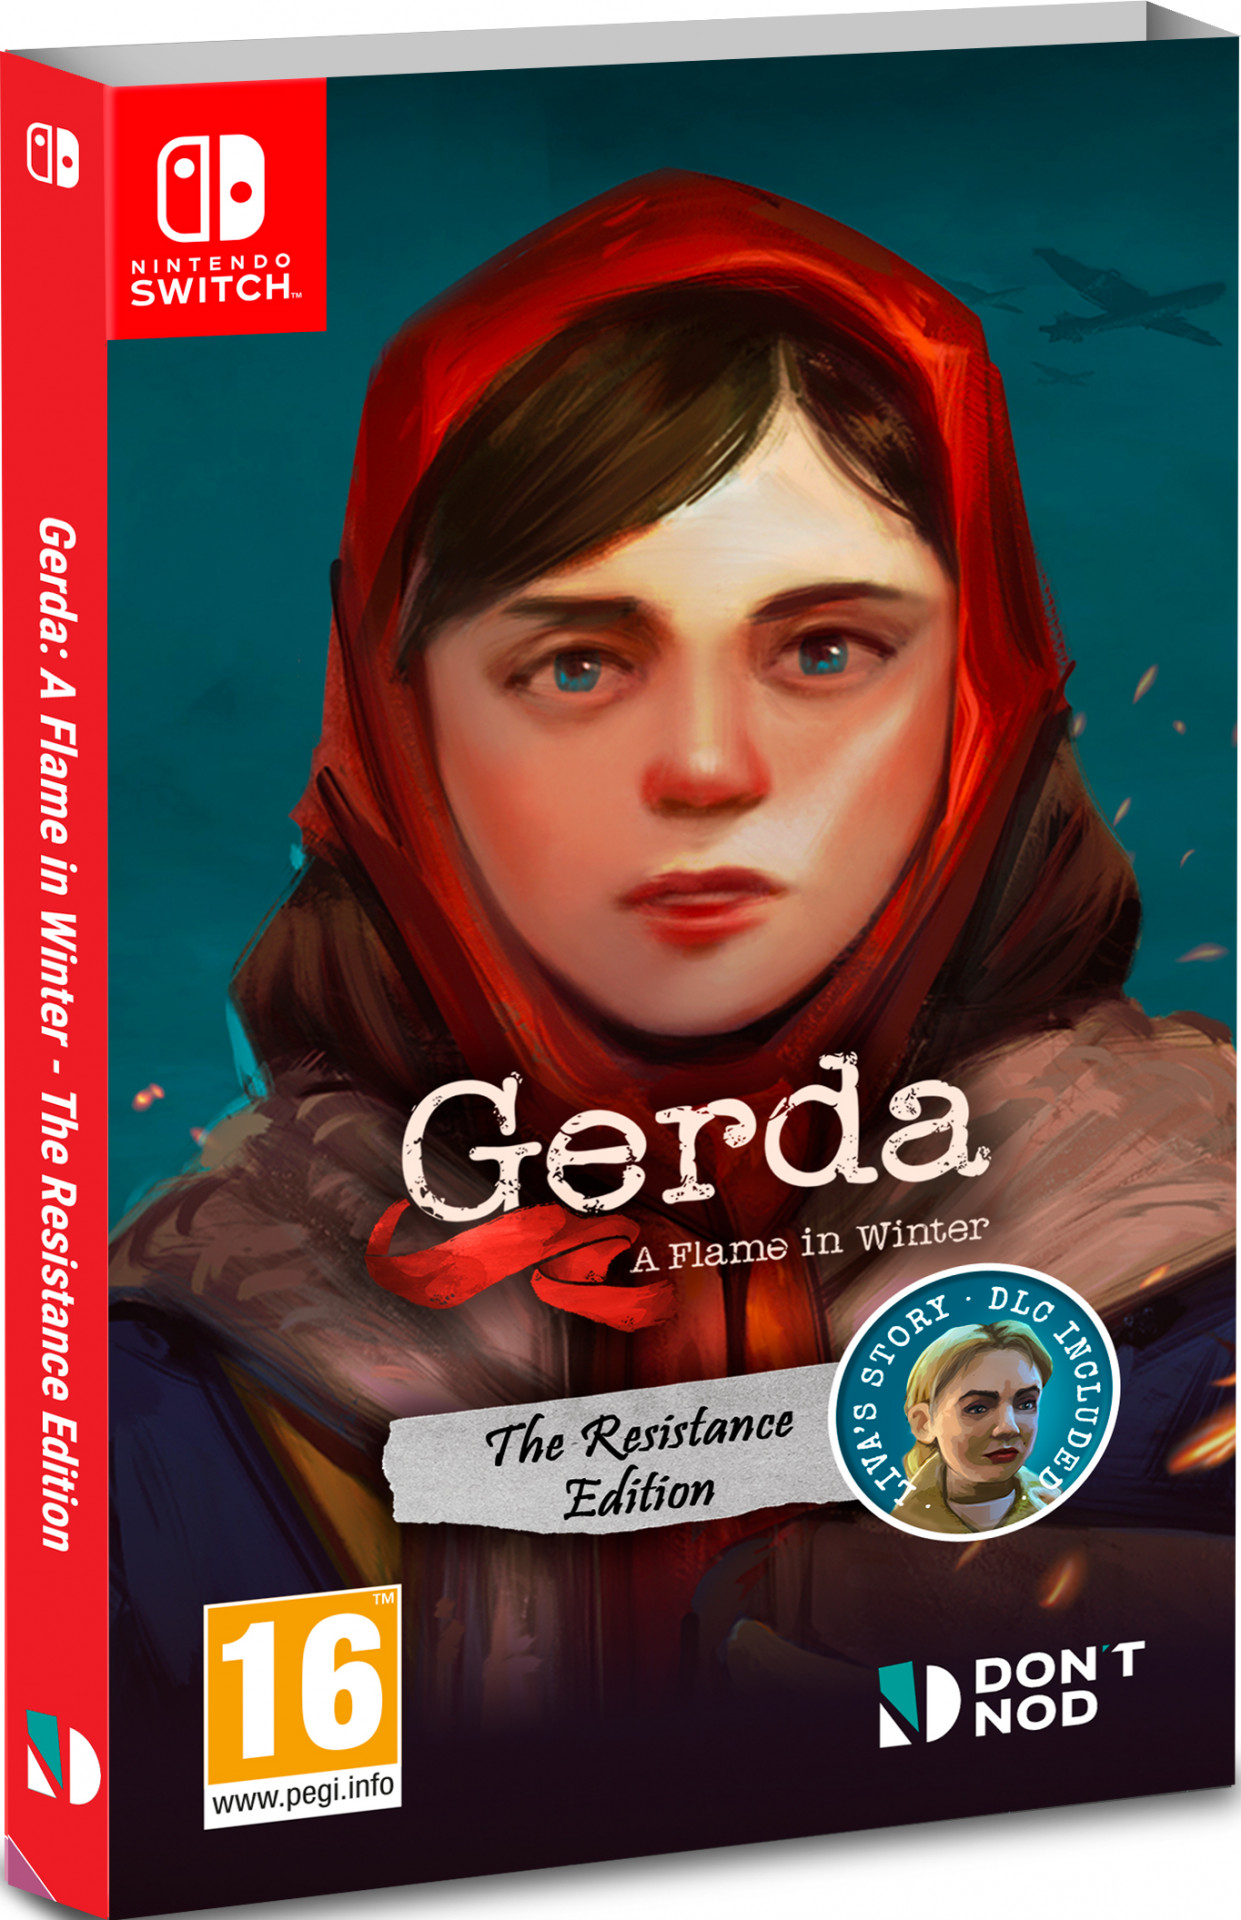 Gerda A Flame In Winter The Resistance Edition - Nintendo Switch